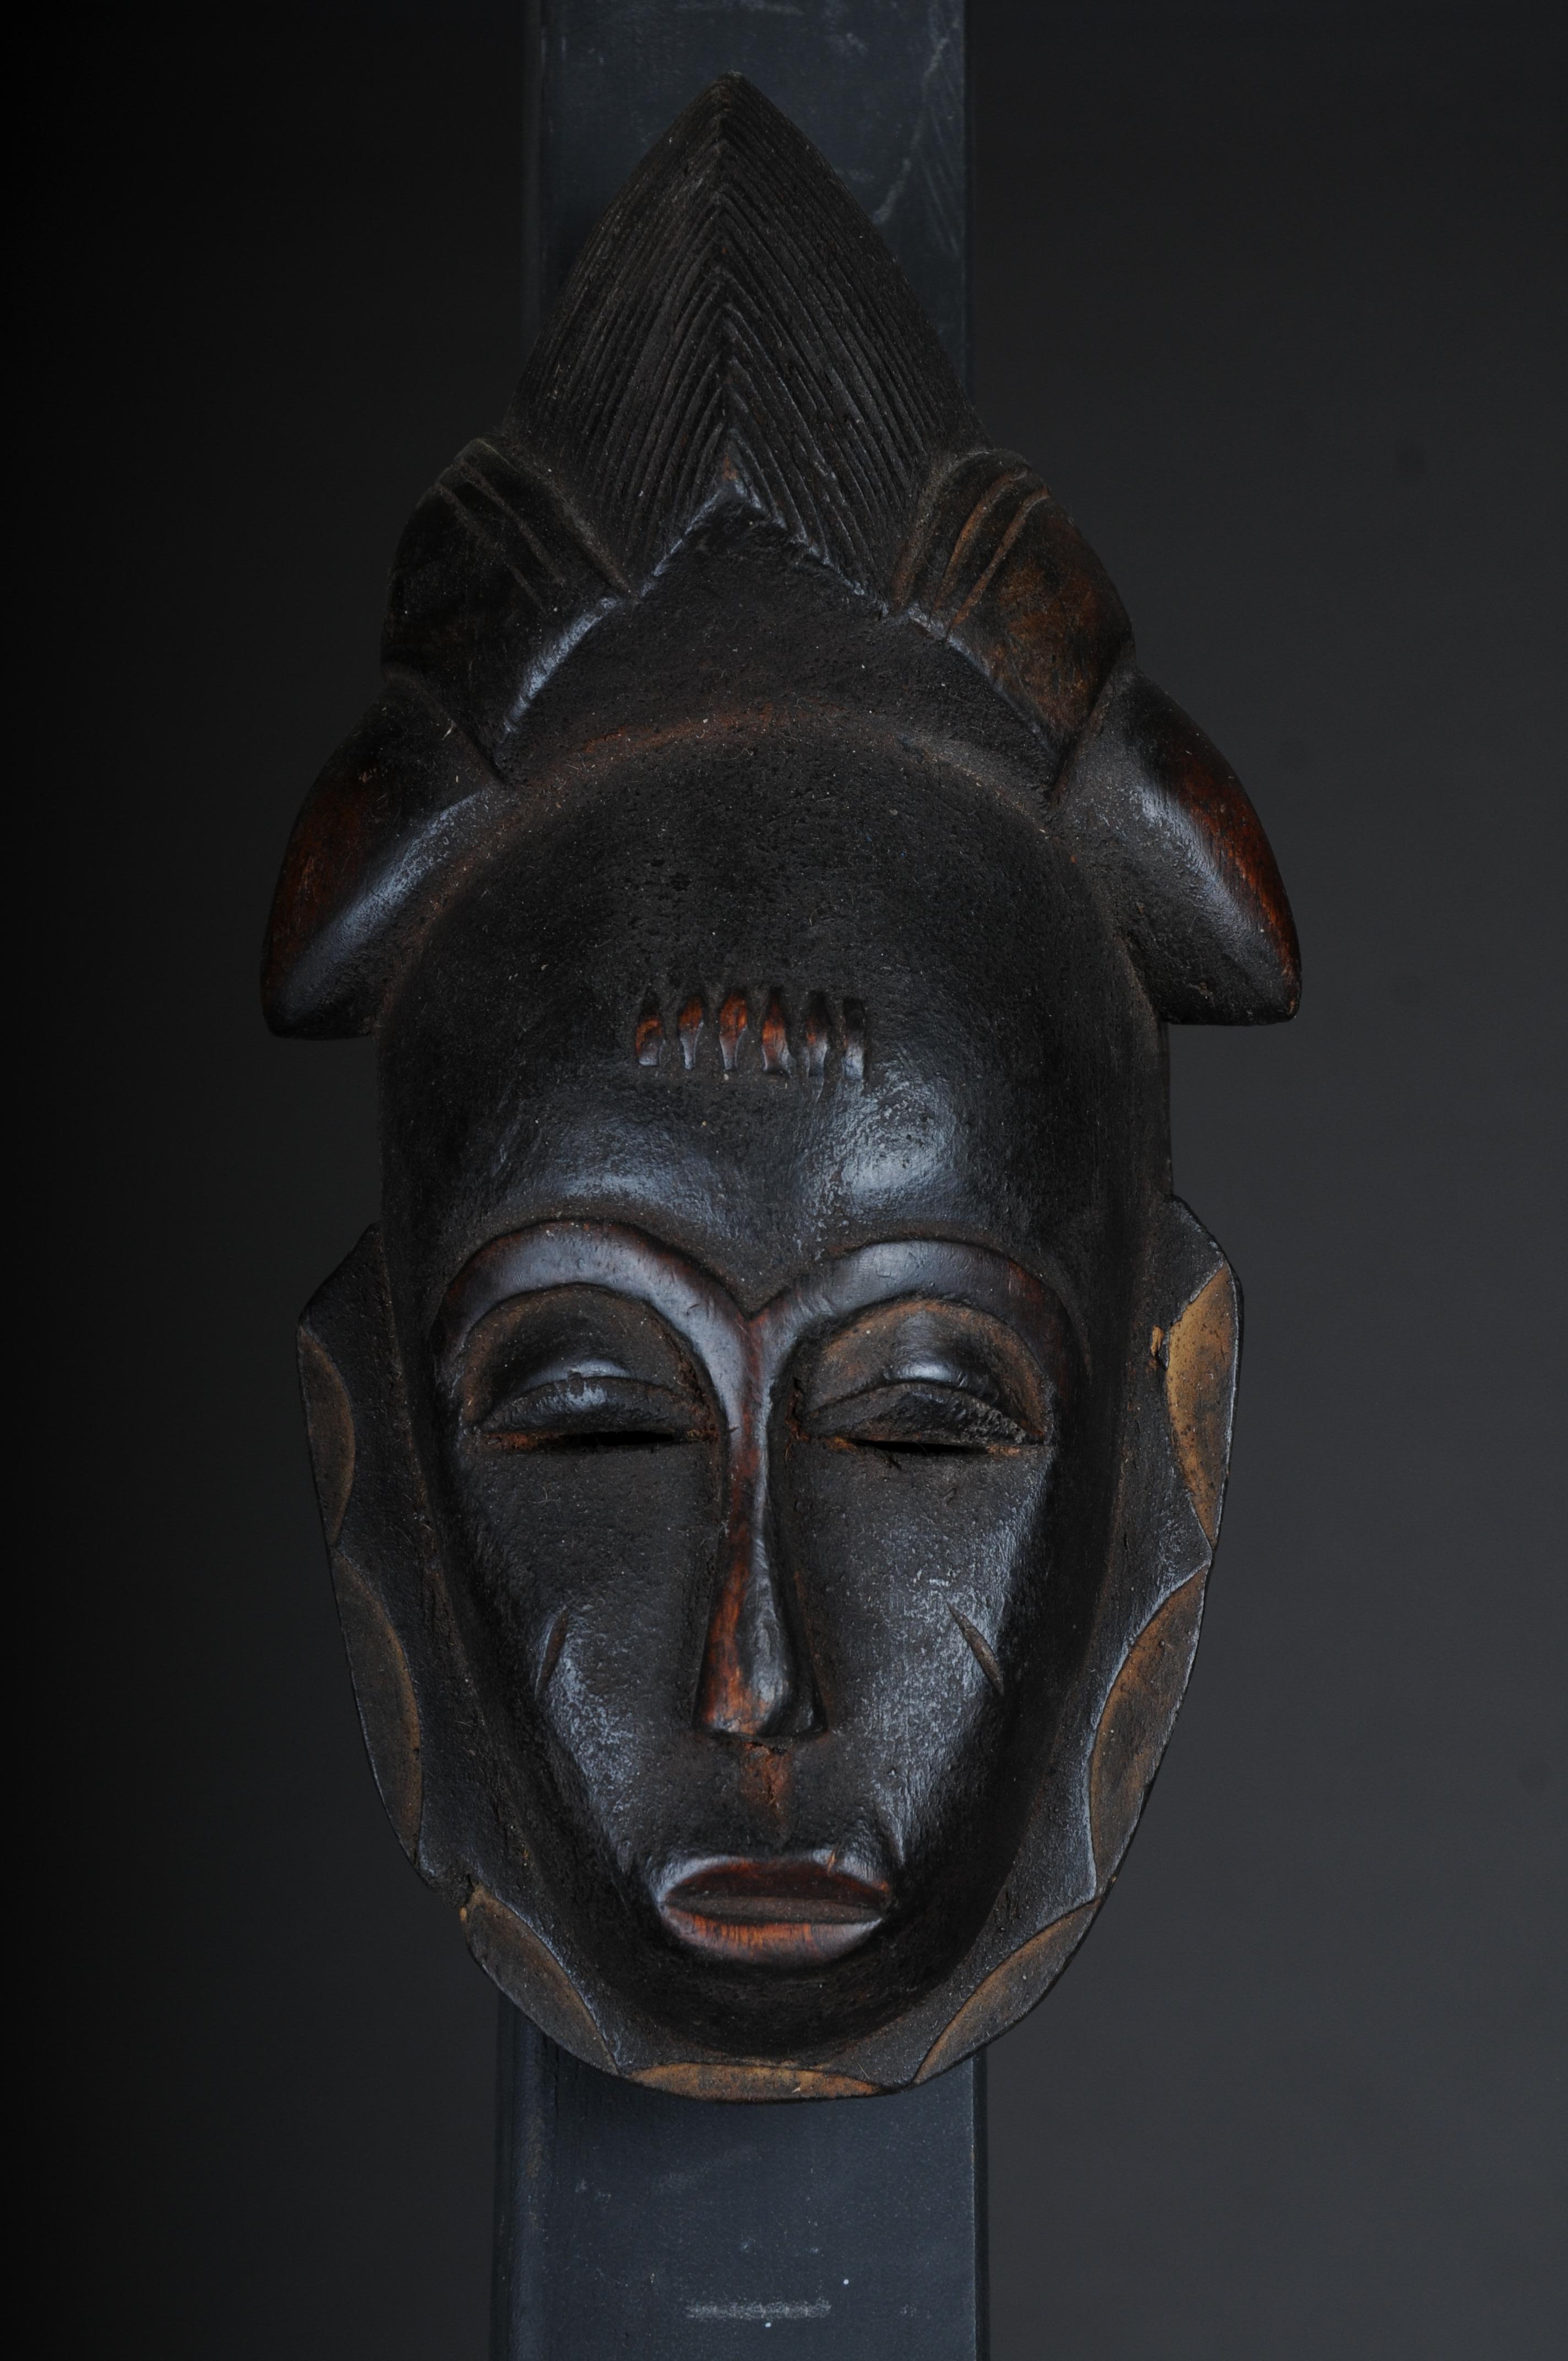 20th Century Antique Carved Wooden Face Mask, African Folk Art. Hangable.Decorative

Solid wood, hand-carved, Africa probably 20th century

The face mask has a device for hanging.

Very decorative timeless work of art.

  Comes from a Berlin private